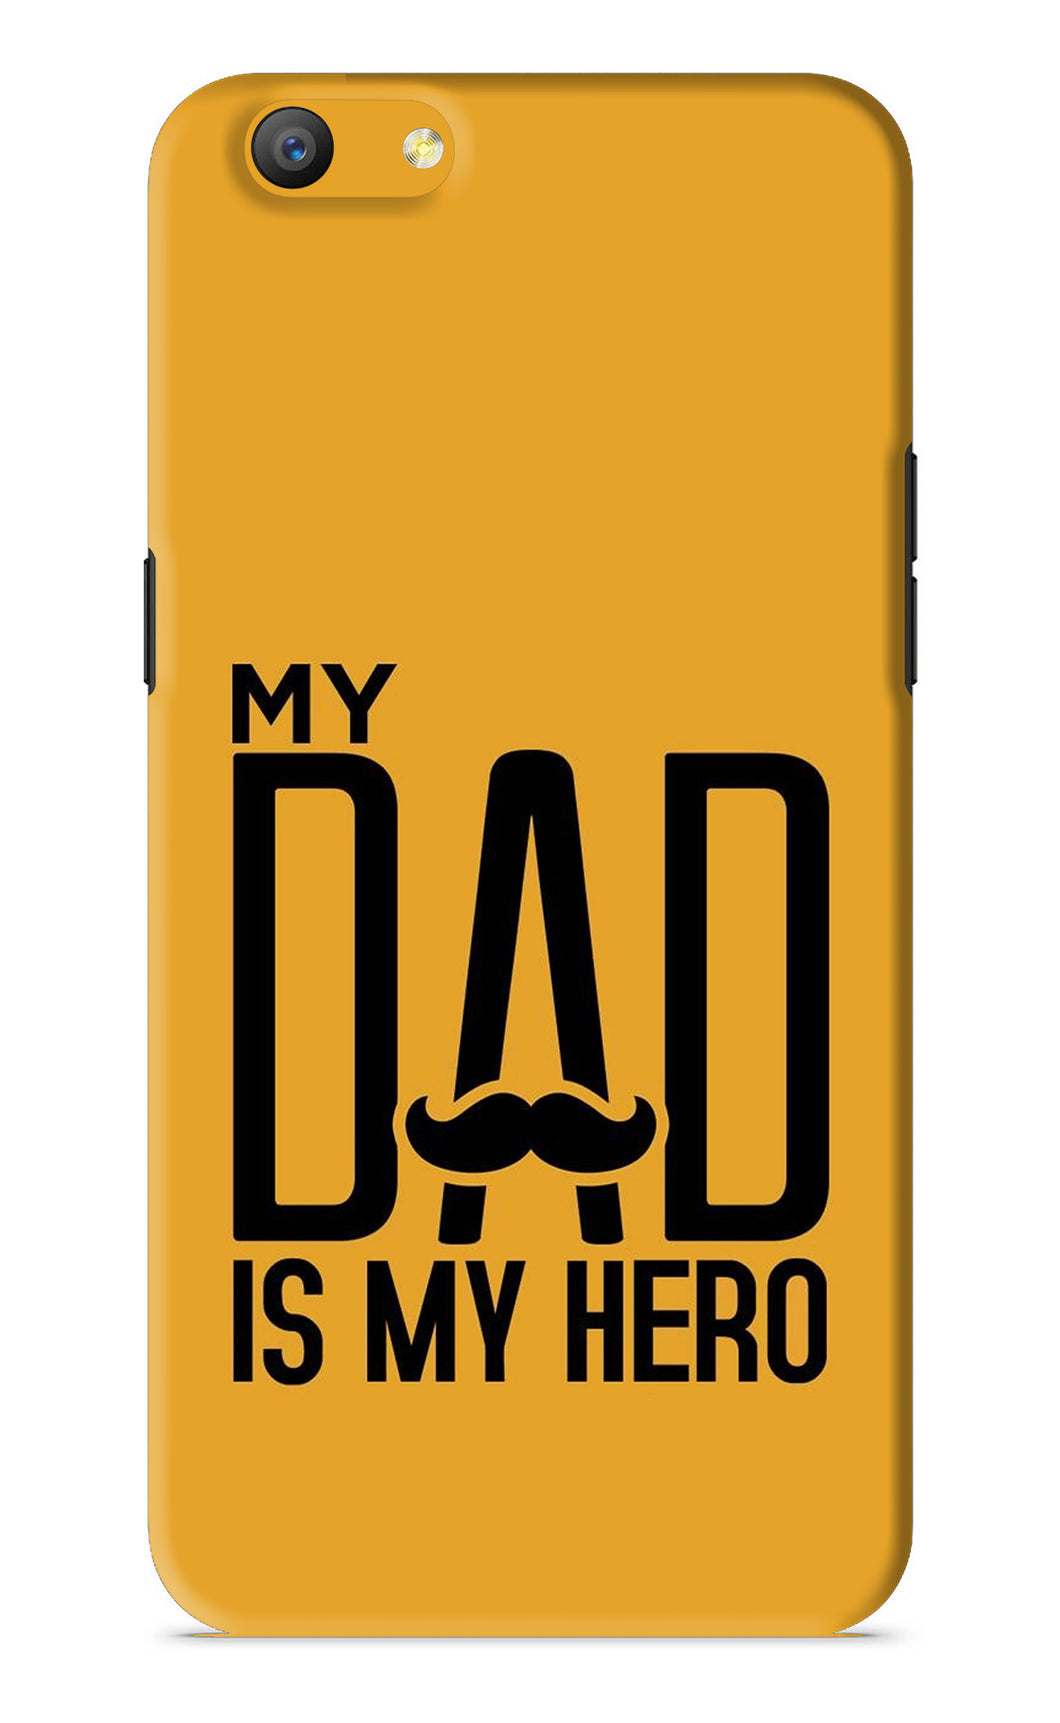 My Dad Is My Hero Oppo A57 Back Skin Wrap